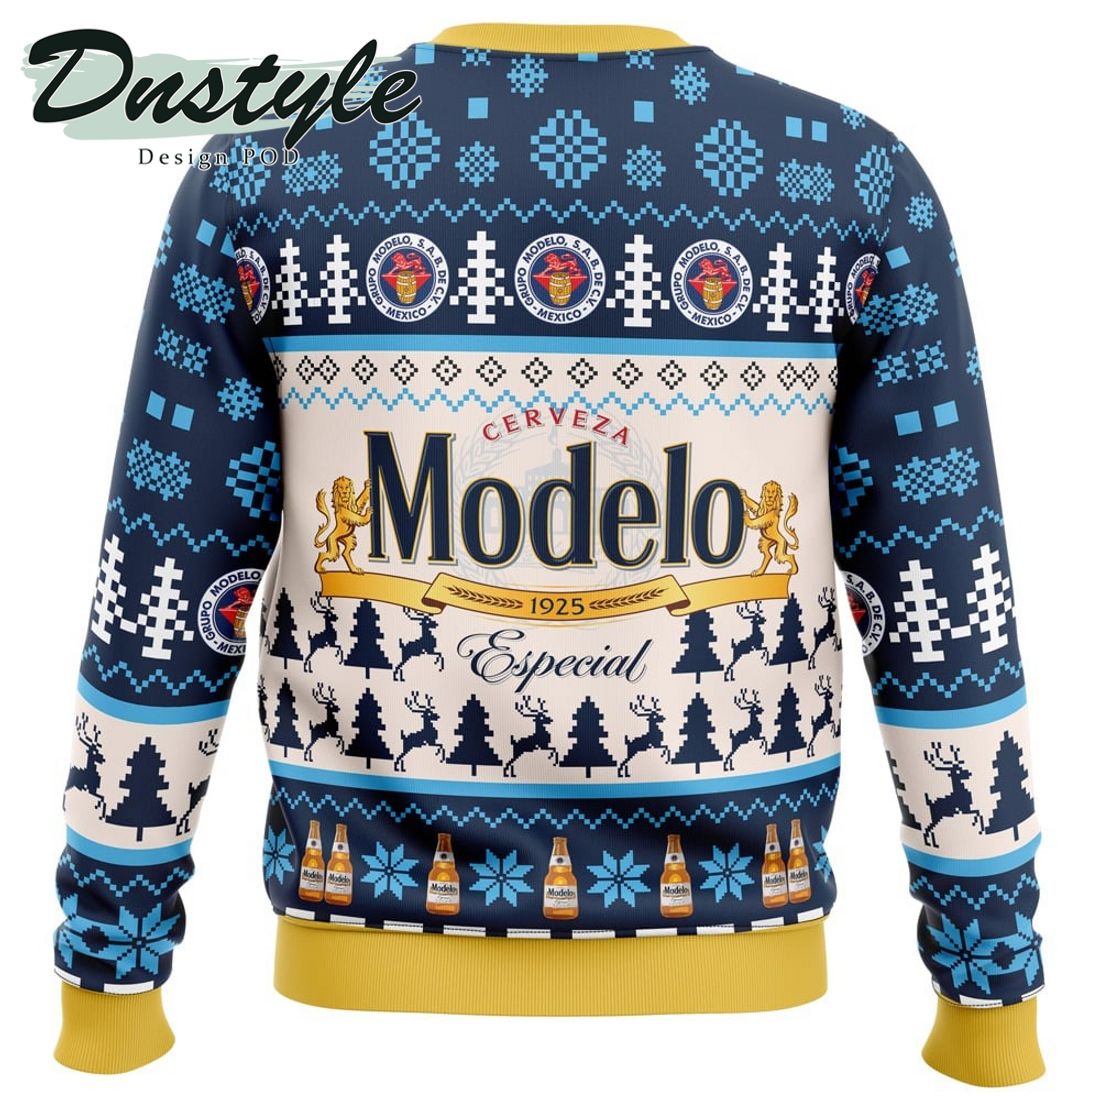 Modelo Especial Beer Ugly Christmas Sweater 1